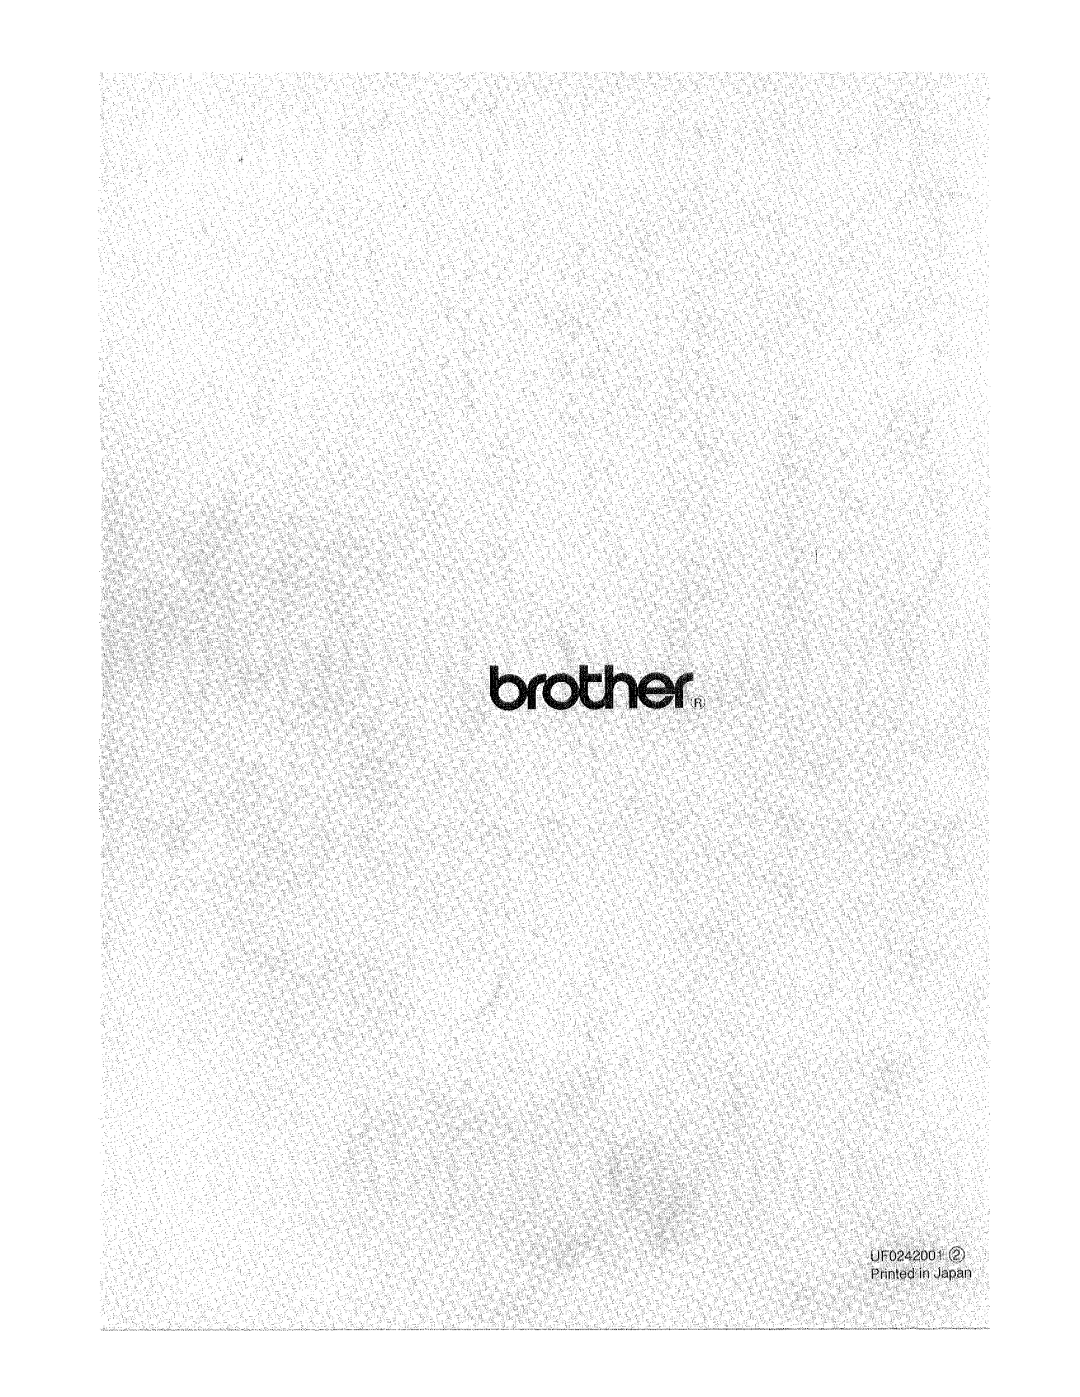 Brother FAX-400 manual 